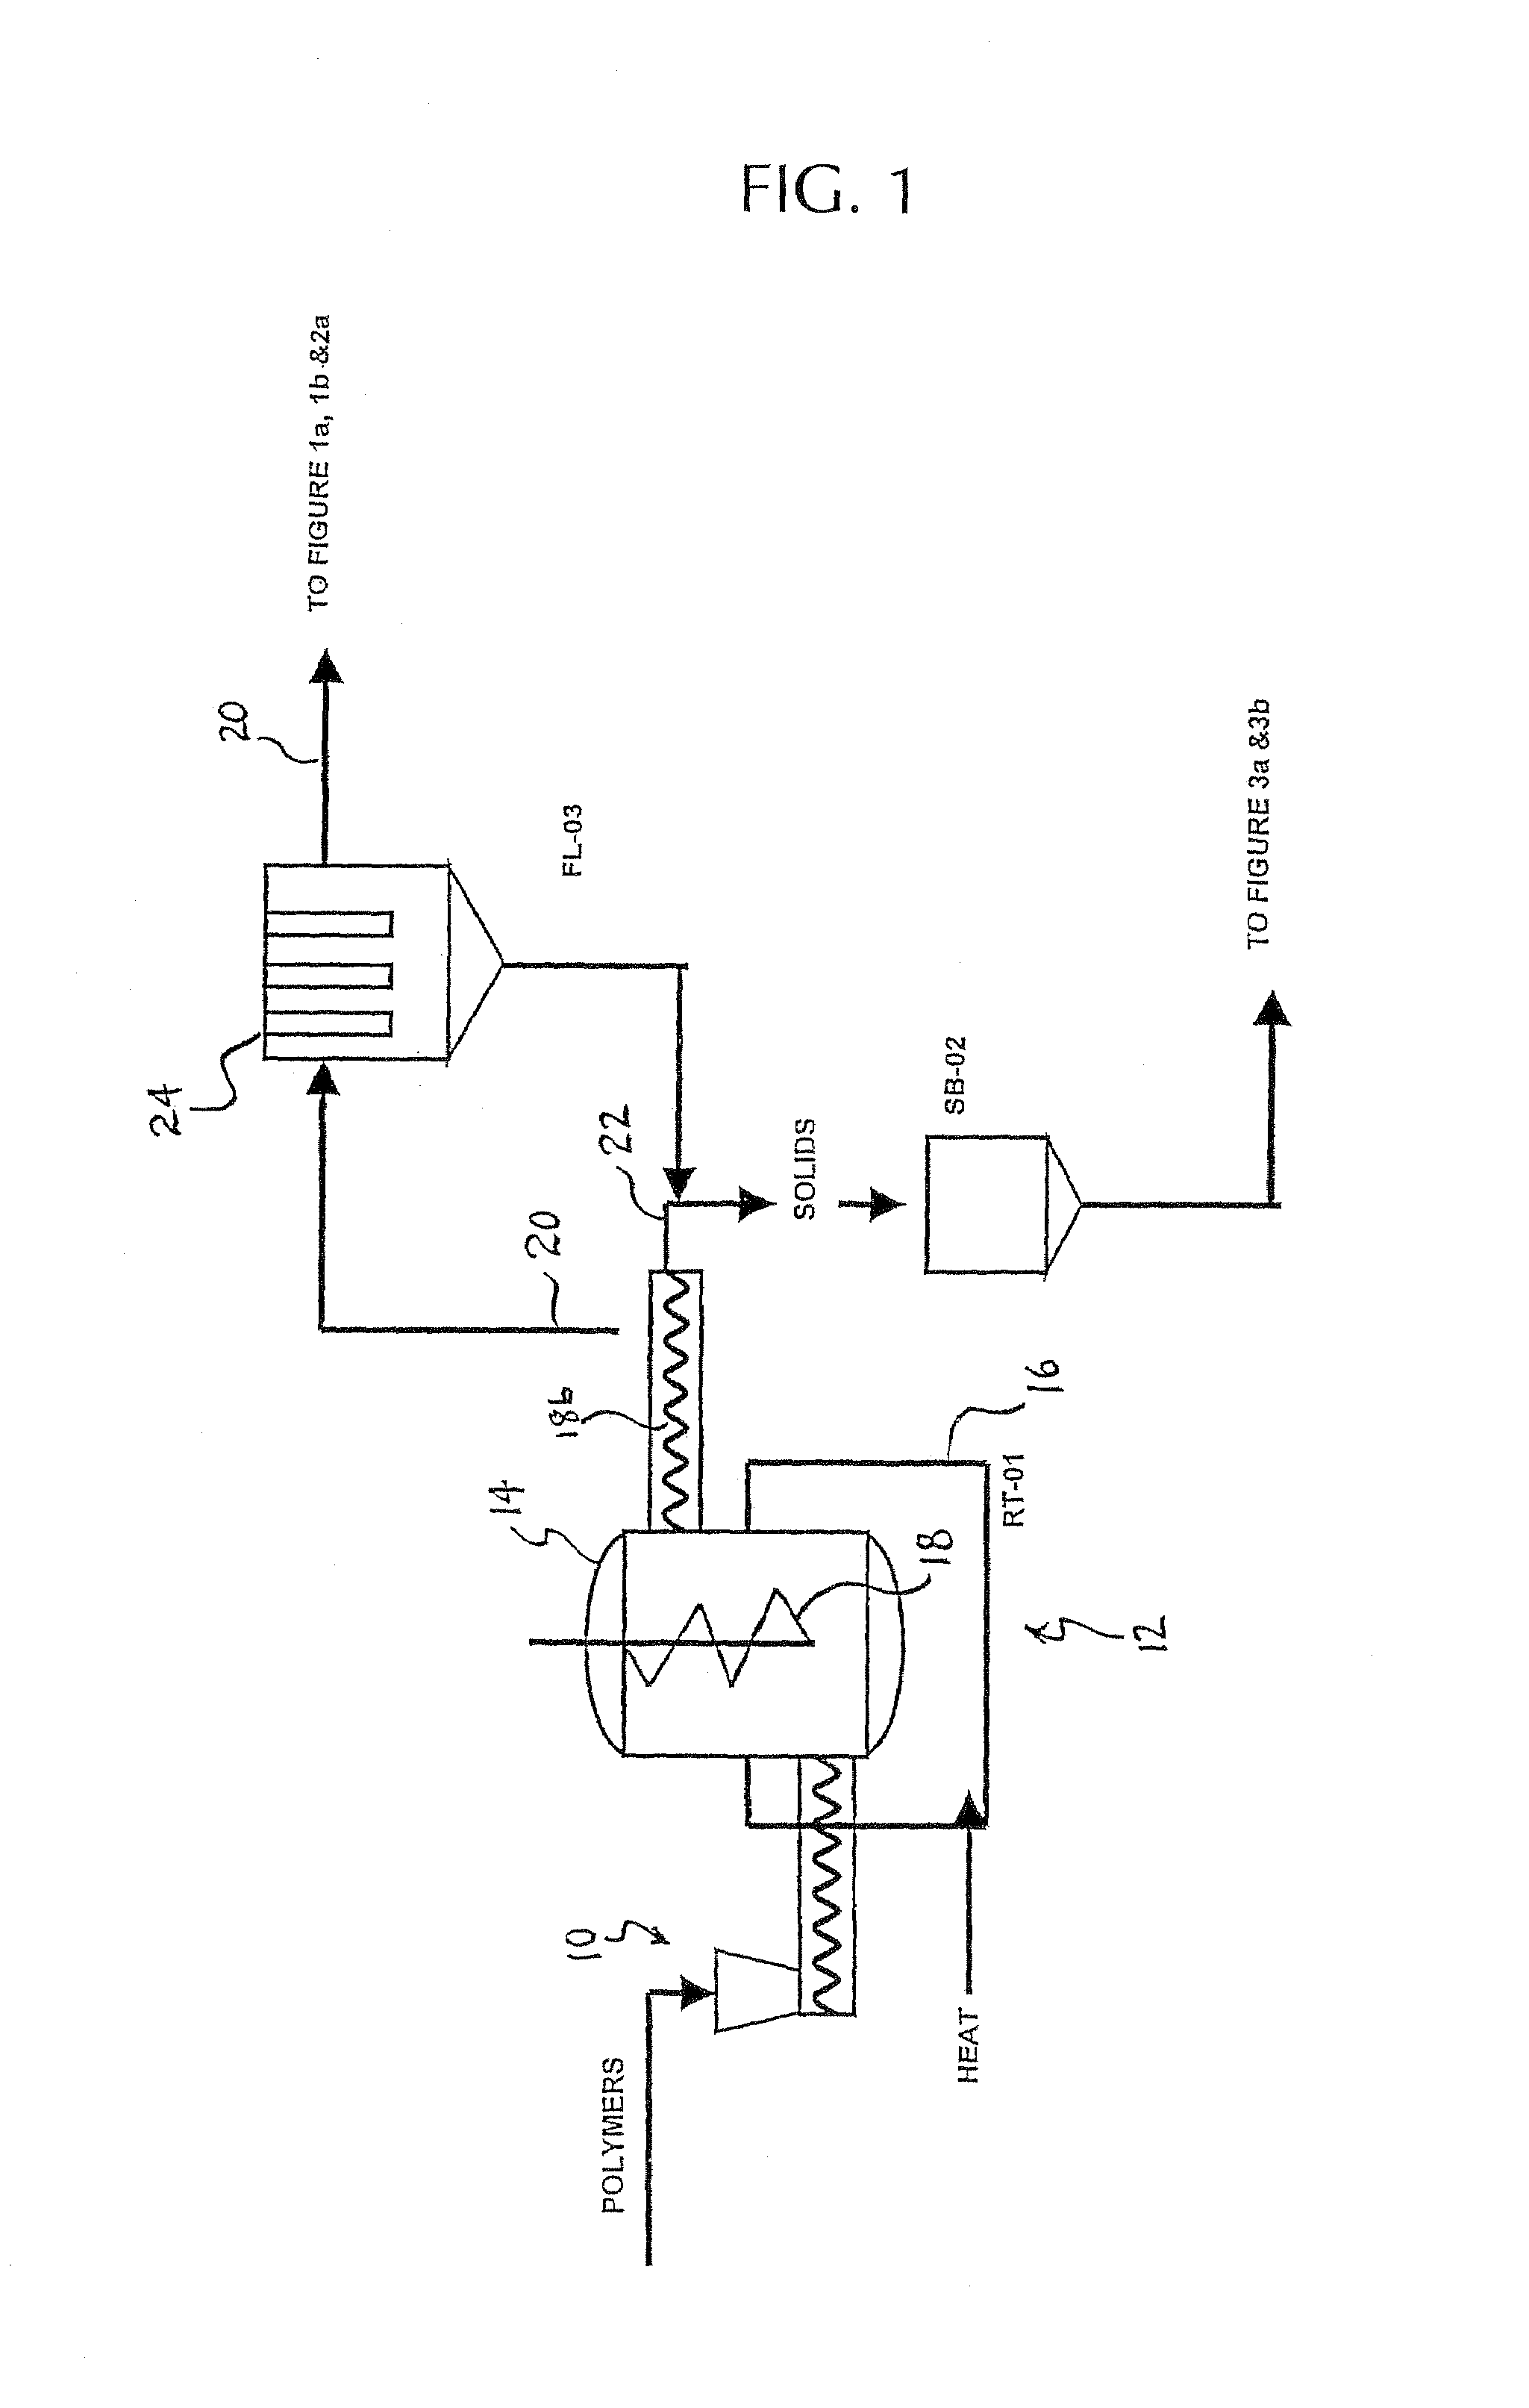 Method and apparatus for the processing of carbon-containing polymeric materials